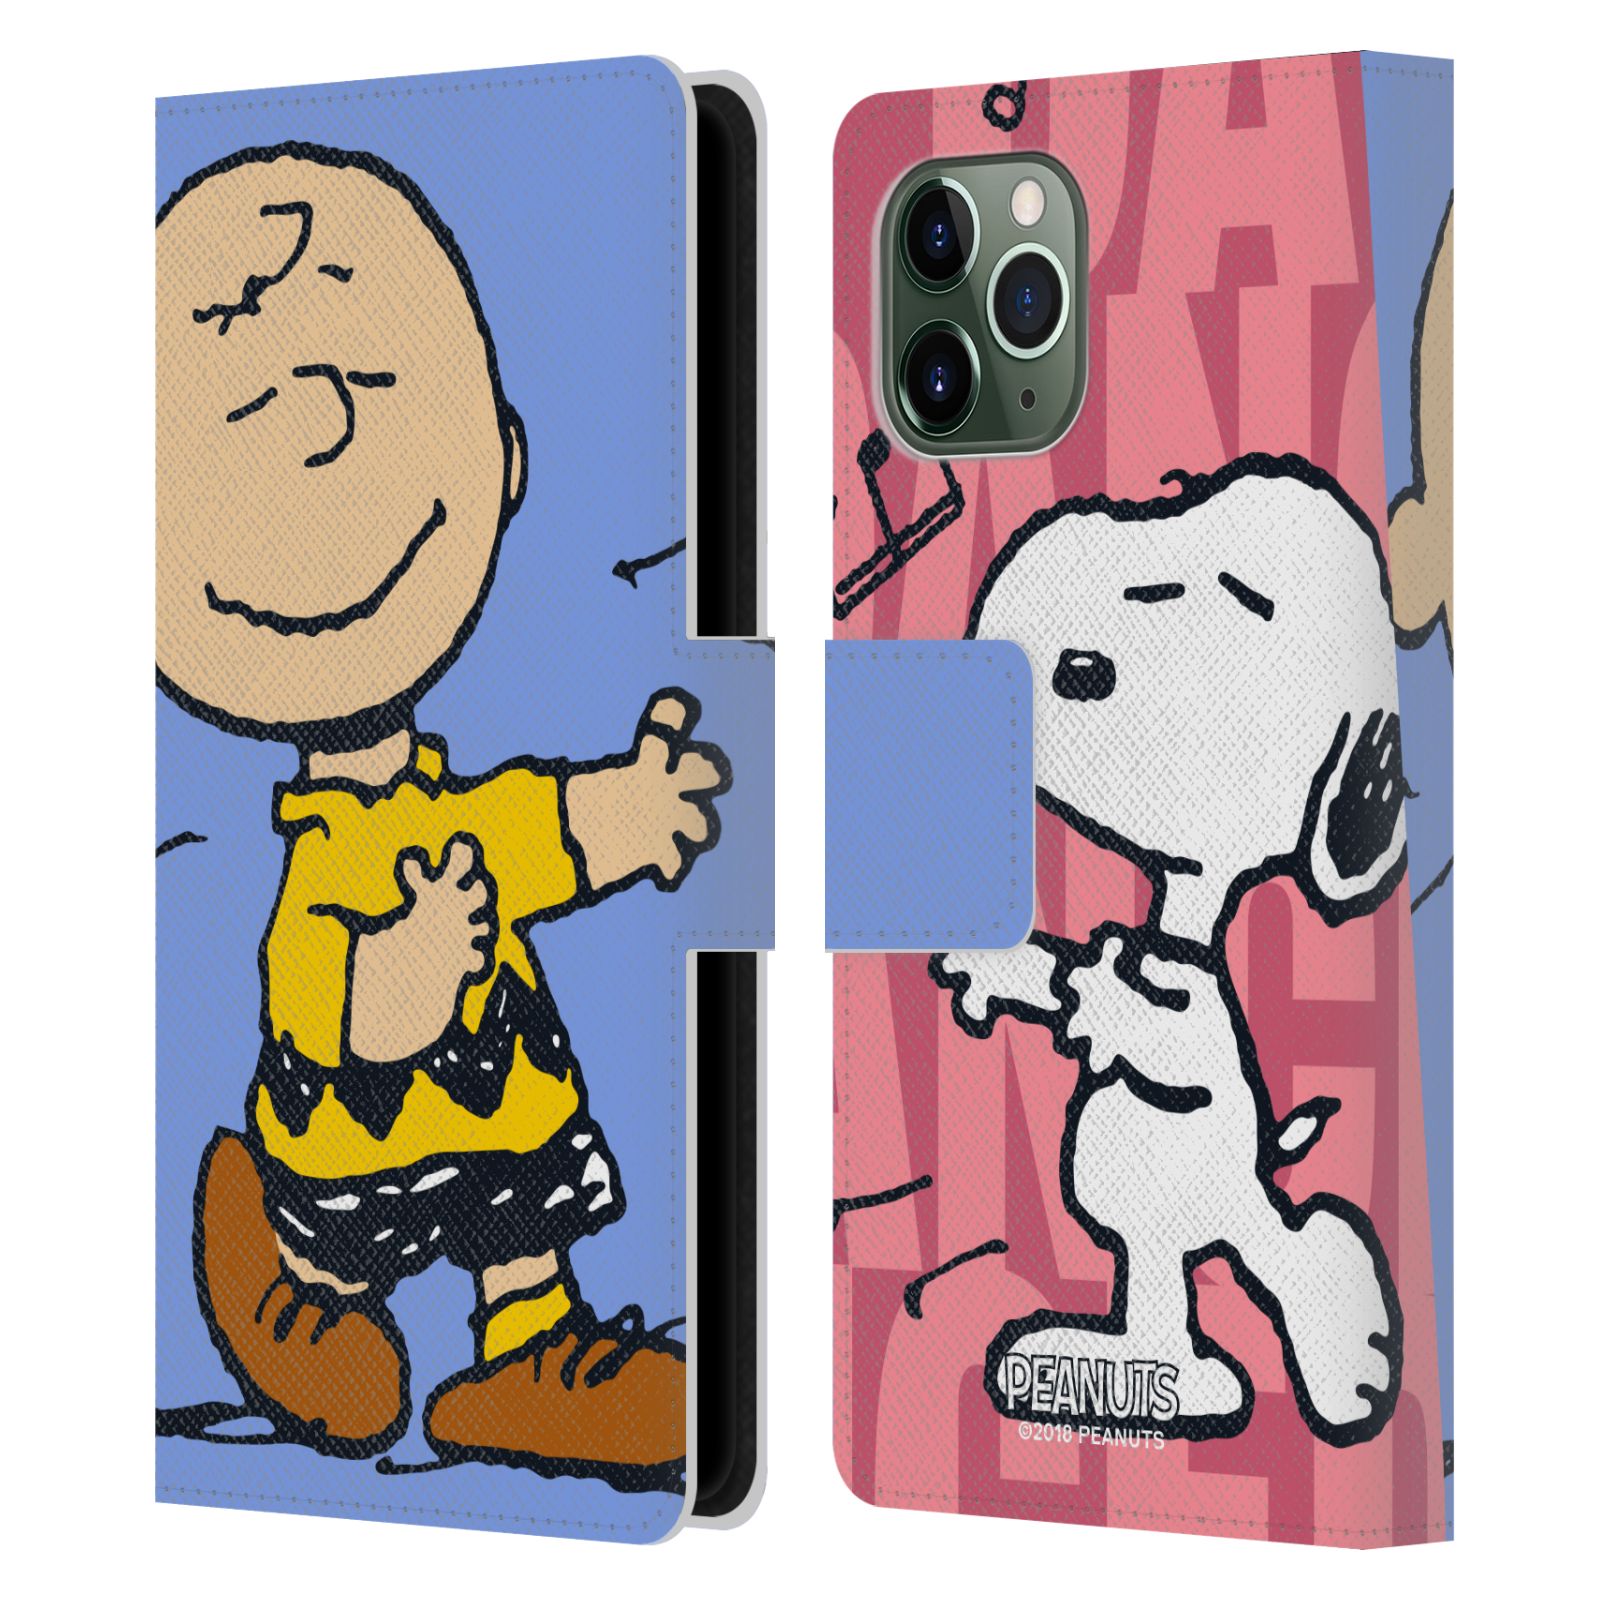 Pouzdro na mobil Apple Iphone 11 PRO - Head Case - Peanuts - Snoopy a Charlie